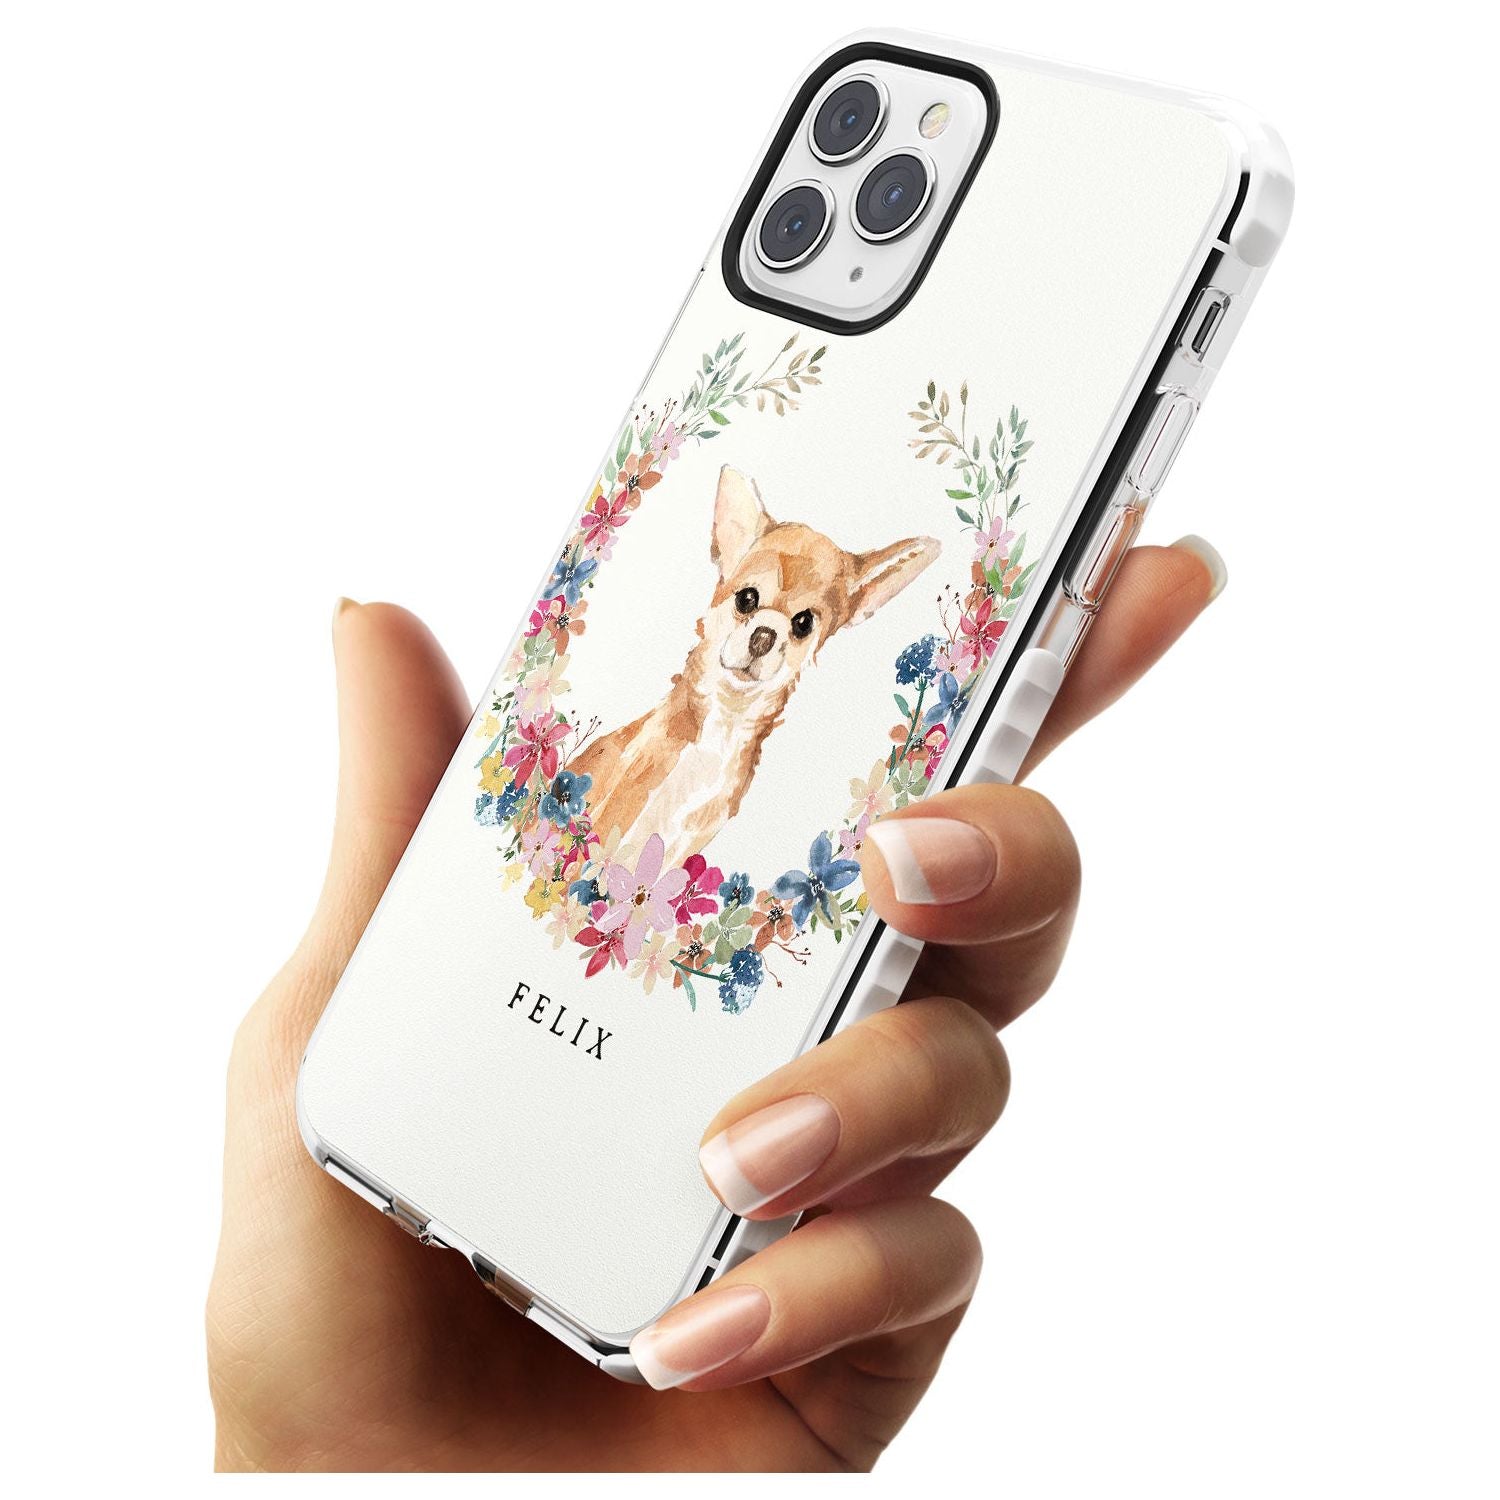 Chihuahua - Watercolour Dog Portrait Impact Phone Case for iPhone 11 Pro Max